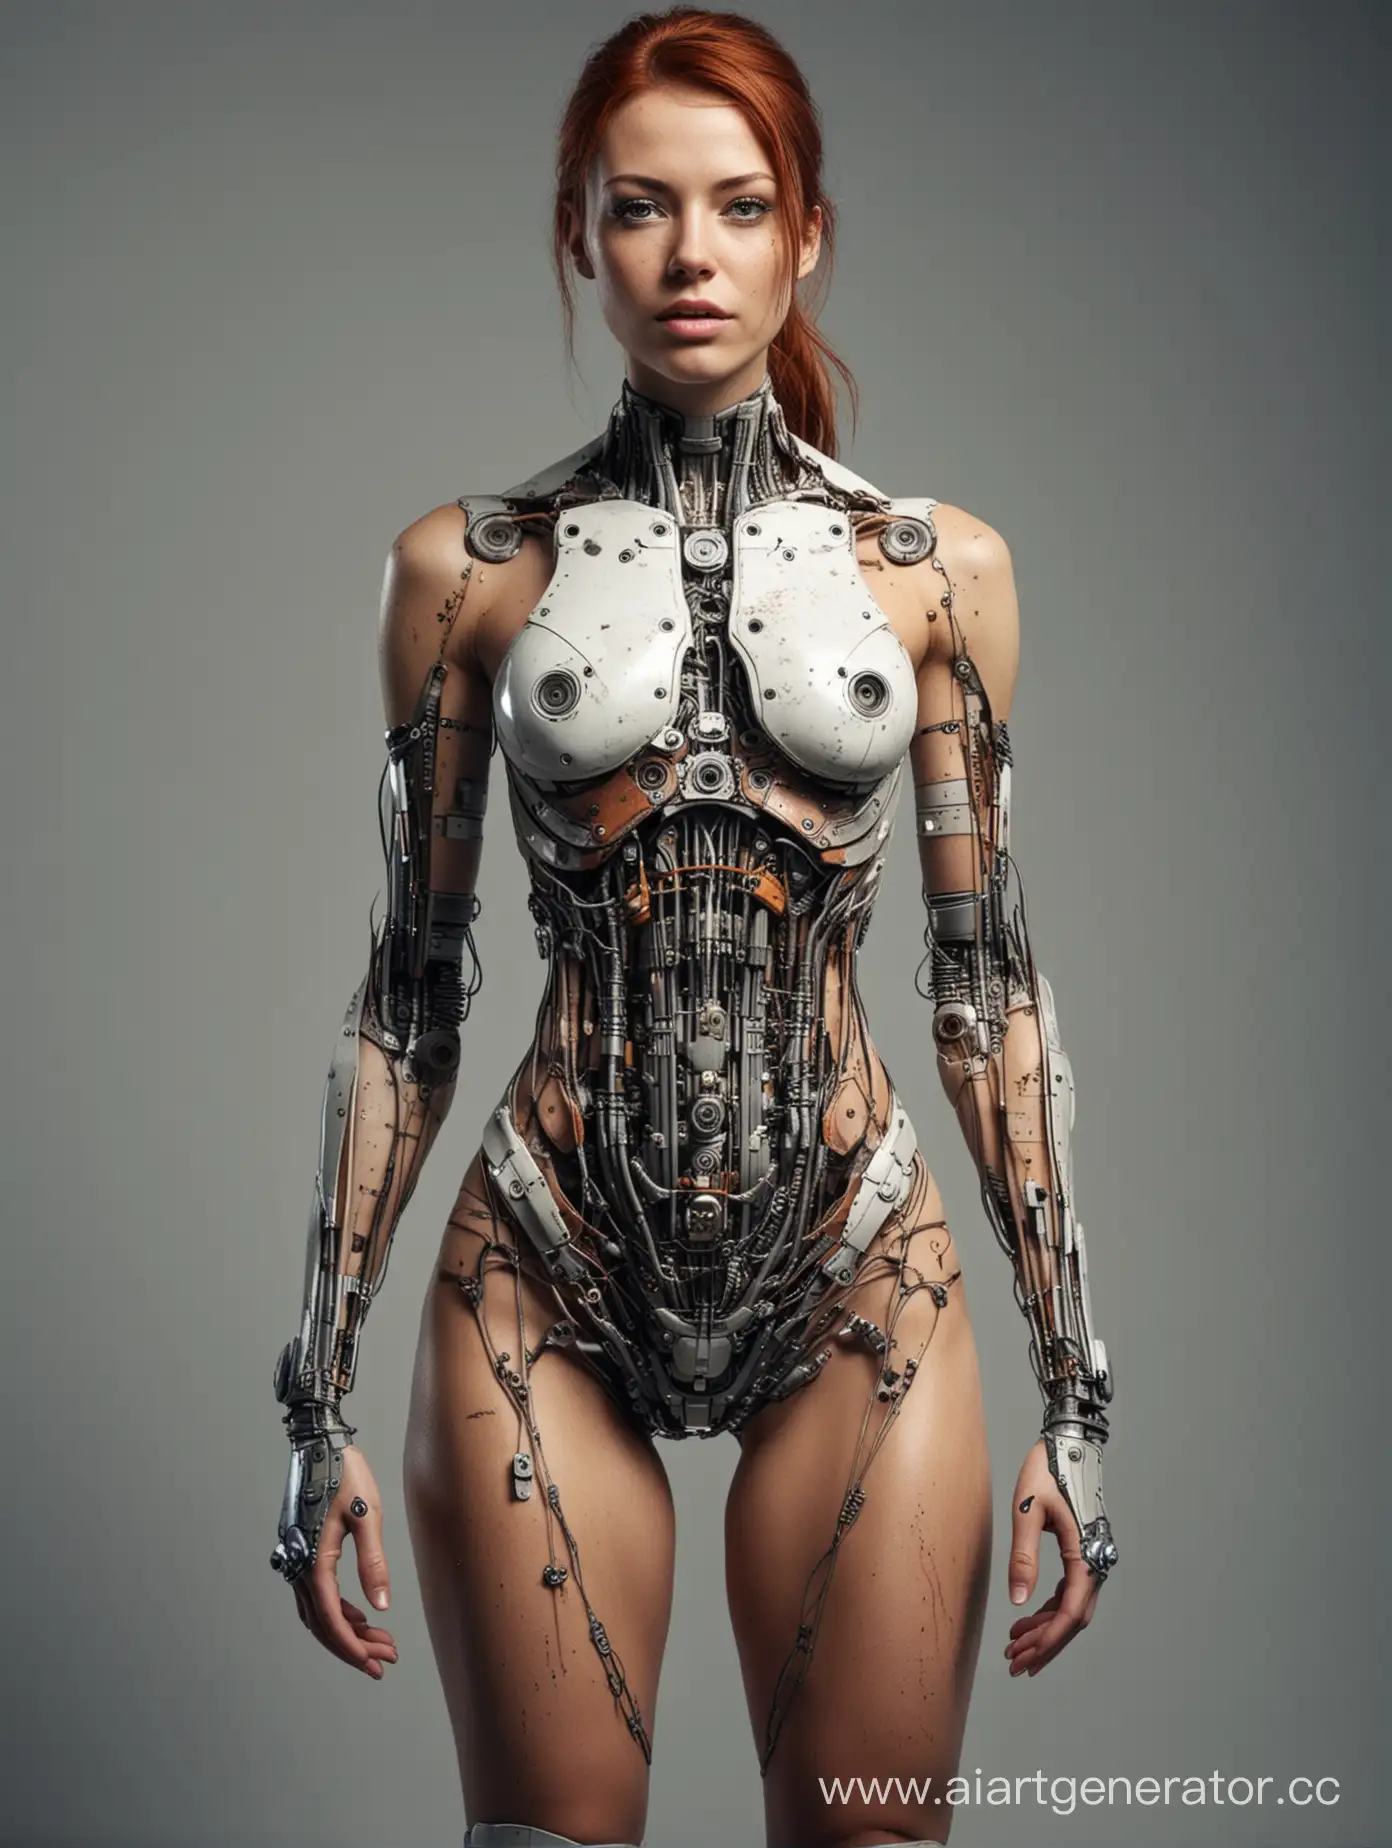 Rusty-Cyborg-Woman-with-Exposed-Mechanisms-and-Wires